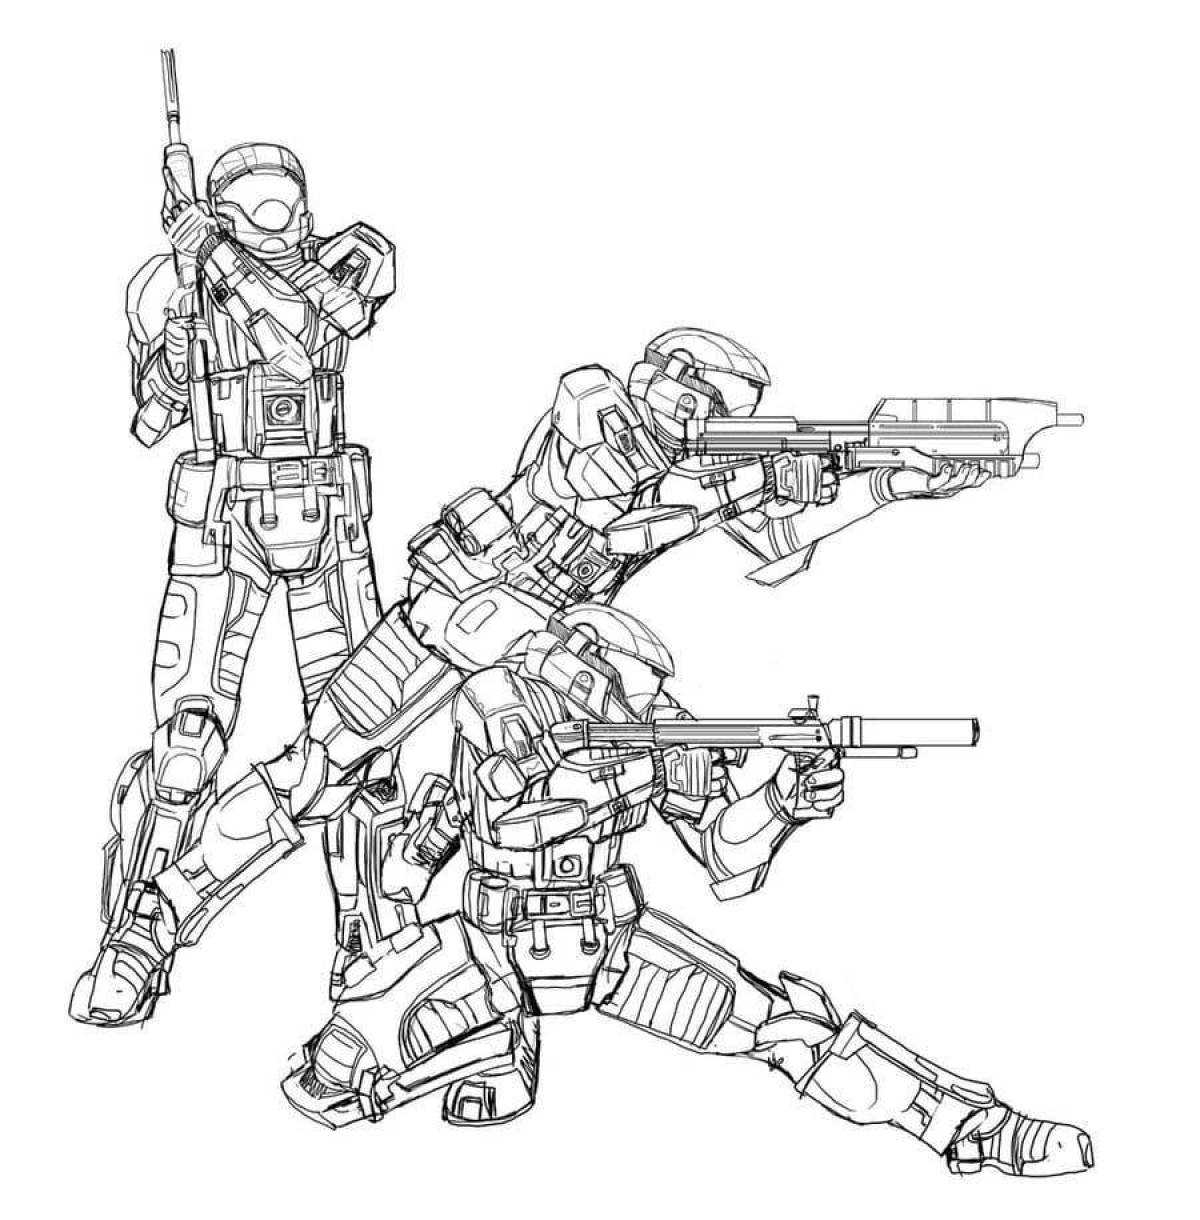 Playful standoff2 coloring page